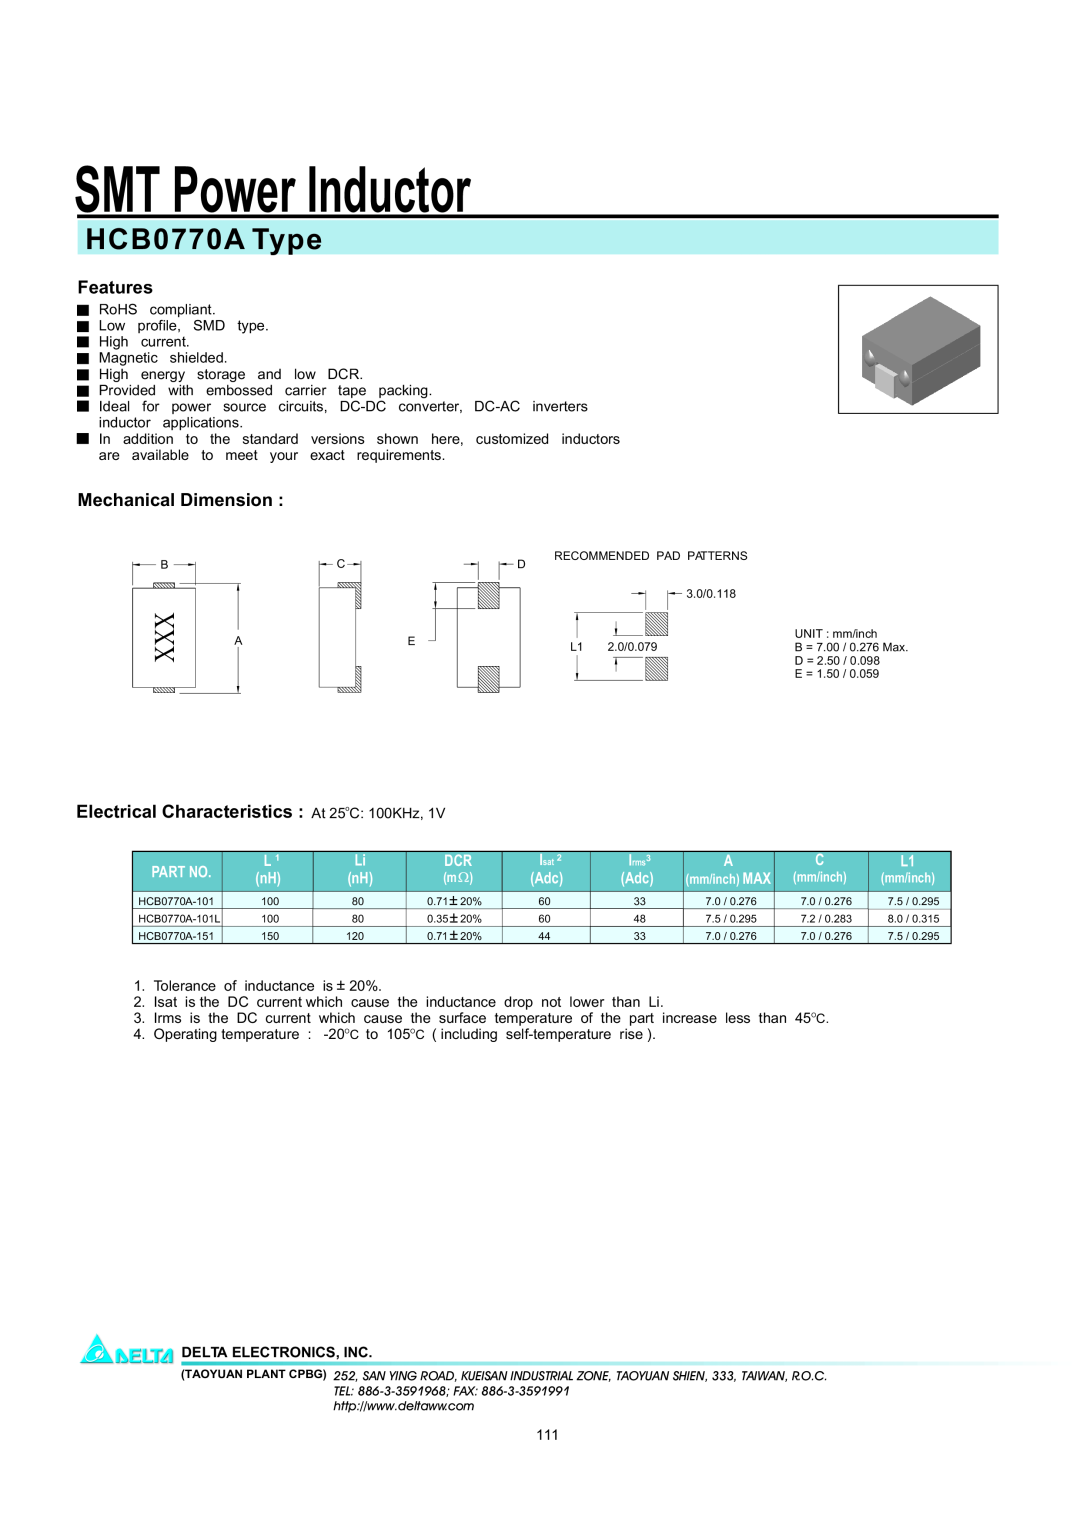 Delta Electronics manual SMT Power Inductor, HCB0770A Type, Features, Mechanical Dimension, Delta Electronics, Inc 